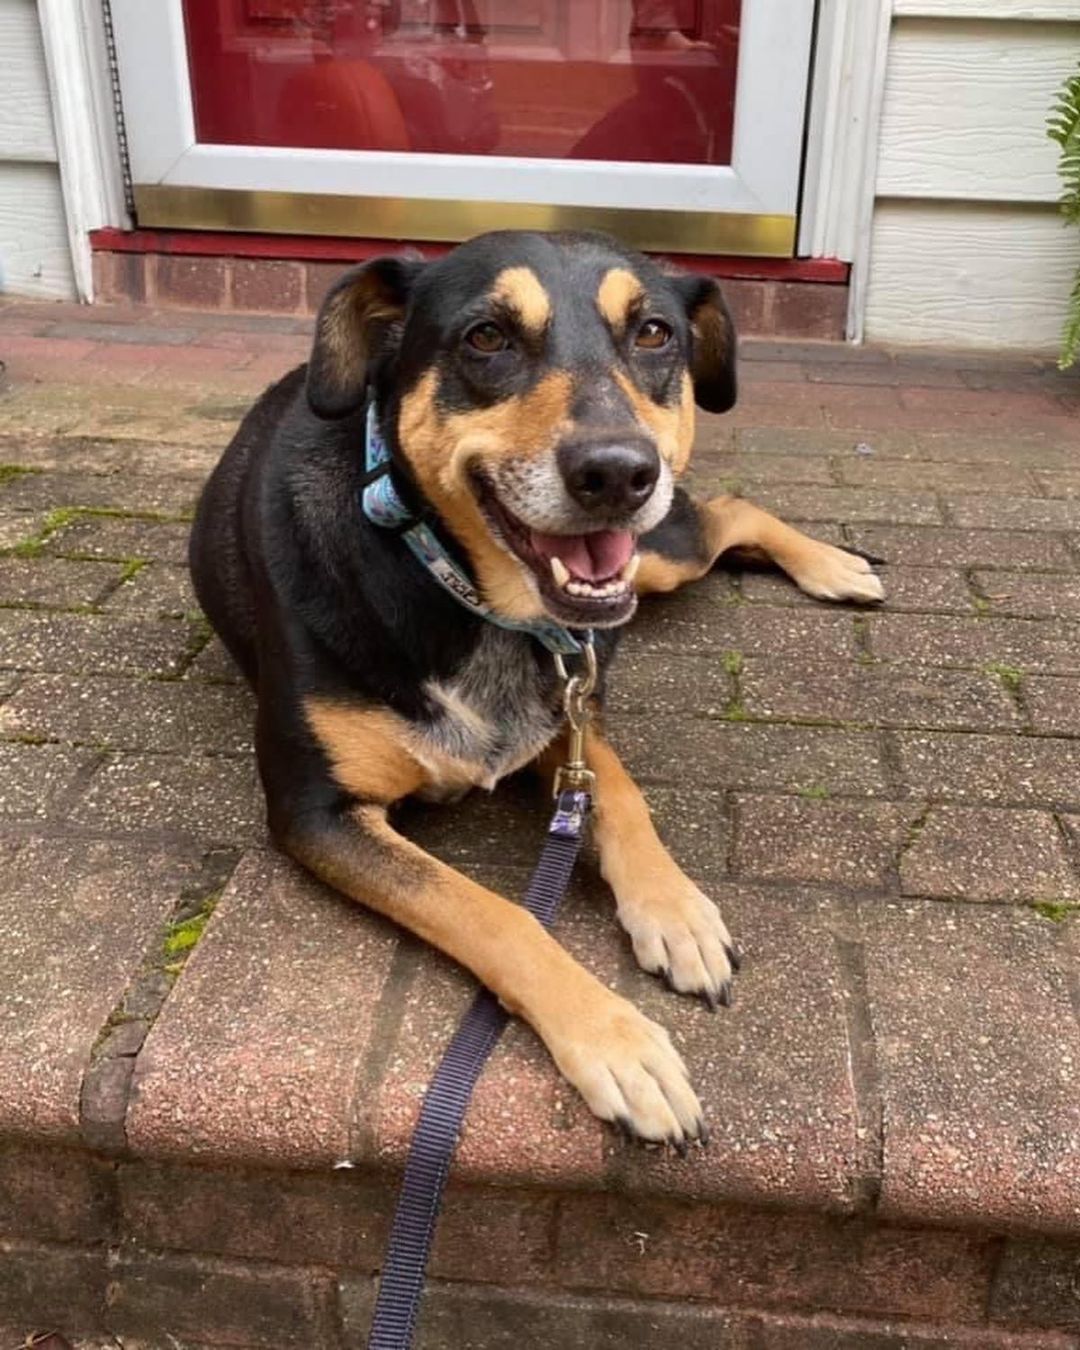 ✨Meet ROXY✨

Roxy is 99% perfect (and we want a perfect forever home for her!)
She is dog/cat friendly and the sweetest pupper ever! Look at that SMILE😍

Roxy is currently being fostered in East Meadow, NY. Think you might have the home she deserves? Contact us at reboundhounds@gmail.com!